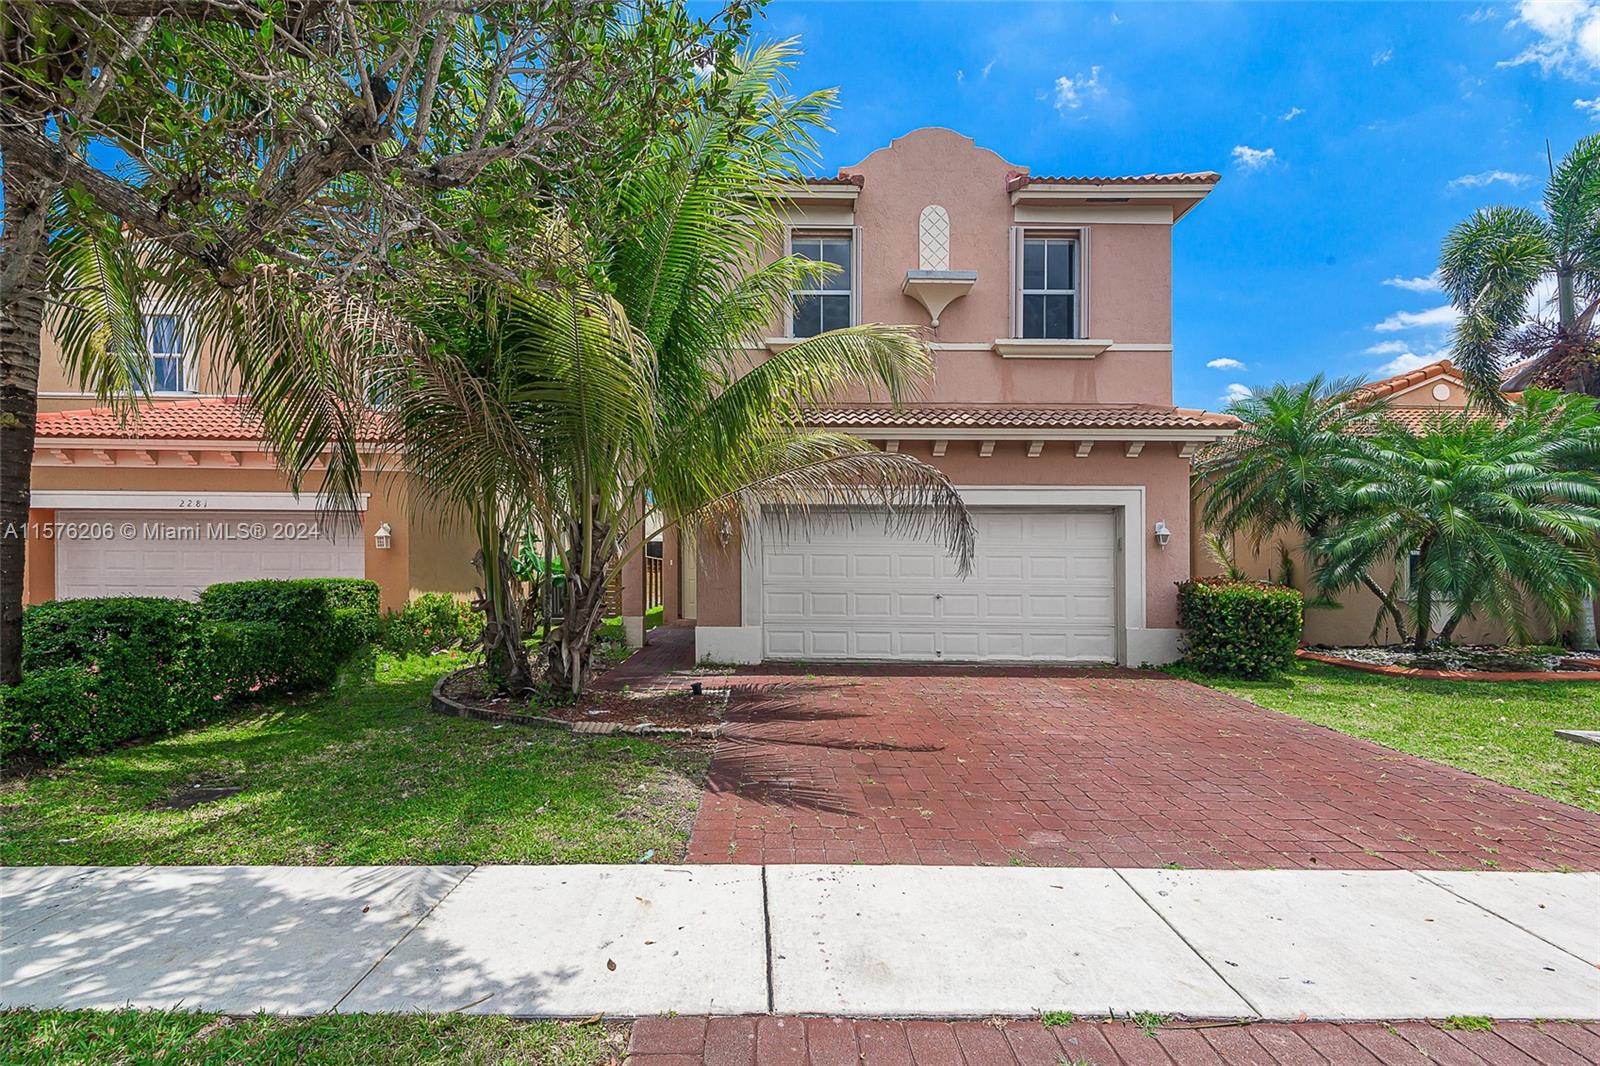 Attention, single-family home, remodeled, 3 bedrooms and 2 bathrooms, double car garage, principal bedroom on the first floor, located in the prestigious Waterstone gated community. Very low HOA. ATTENTION AGENTS READ THE REMARKS.